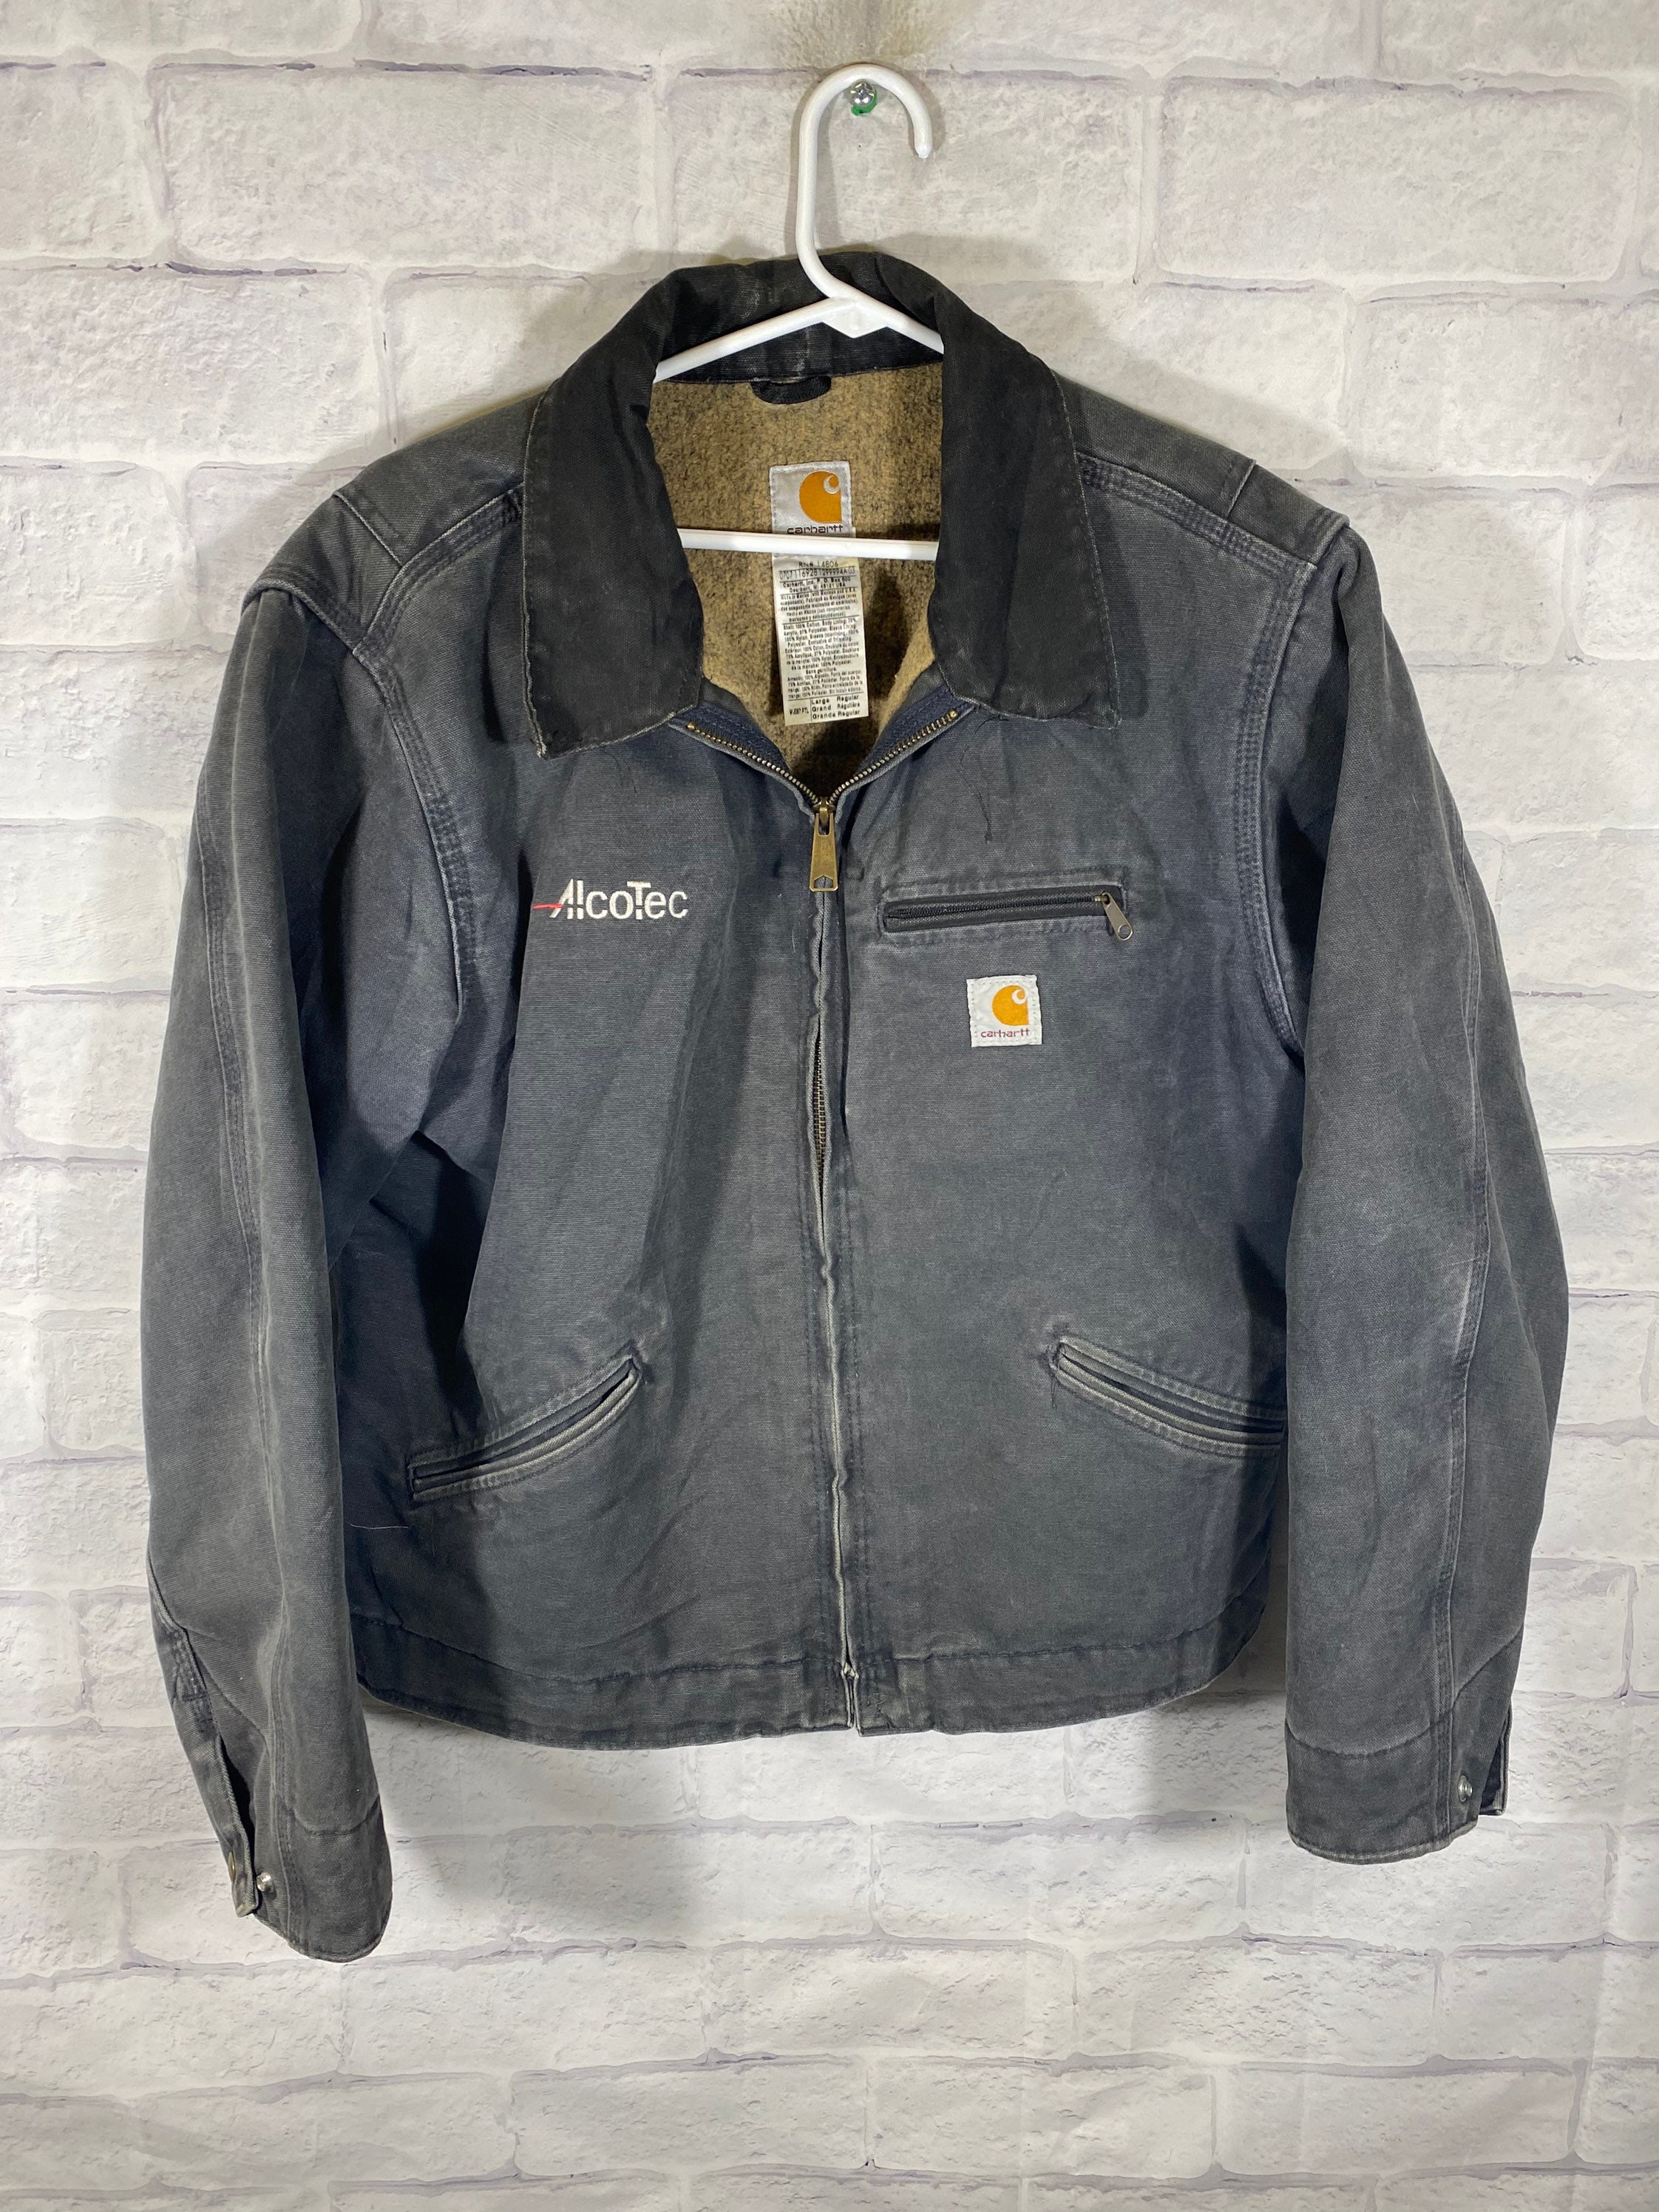 Carhartt Jackets for sale | Only 3 left at -75%